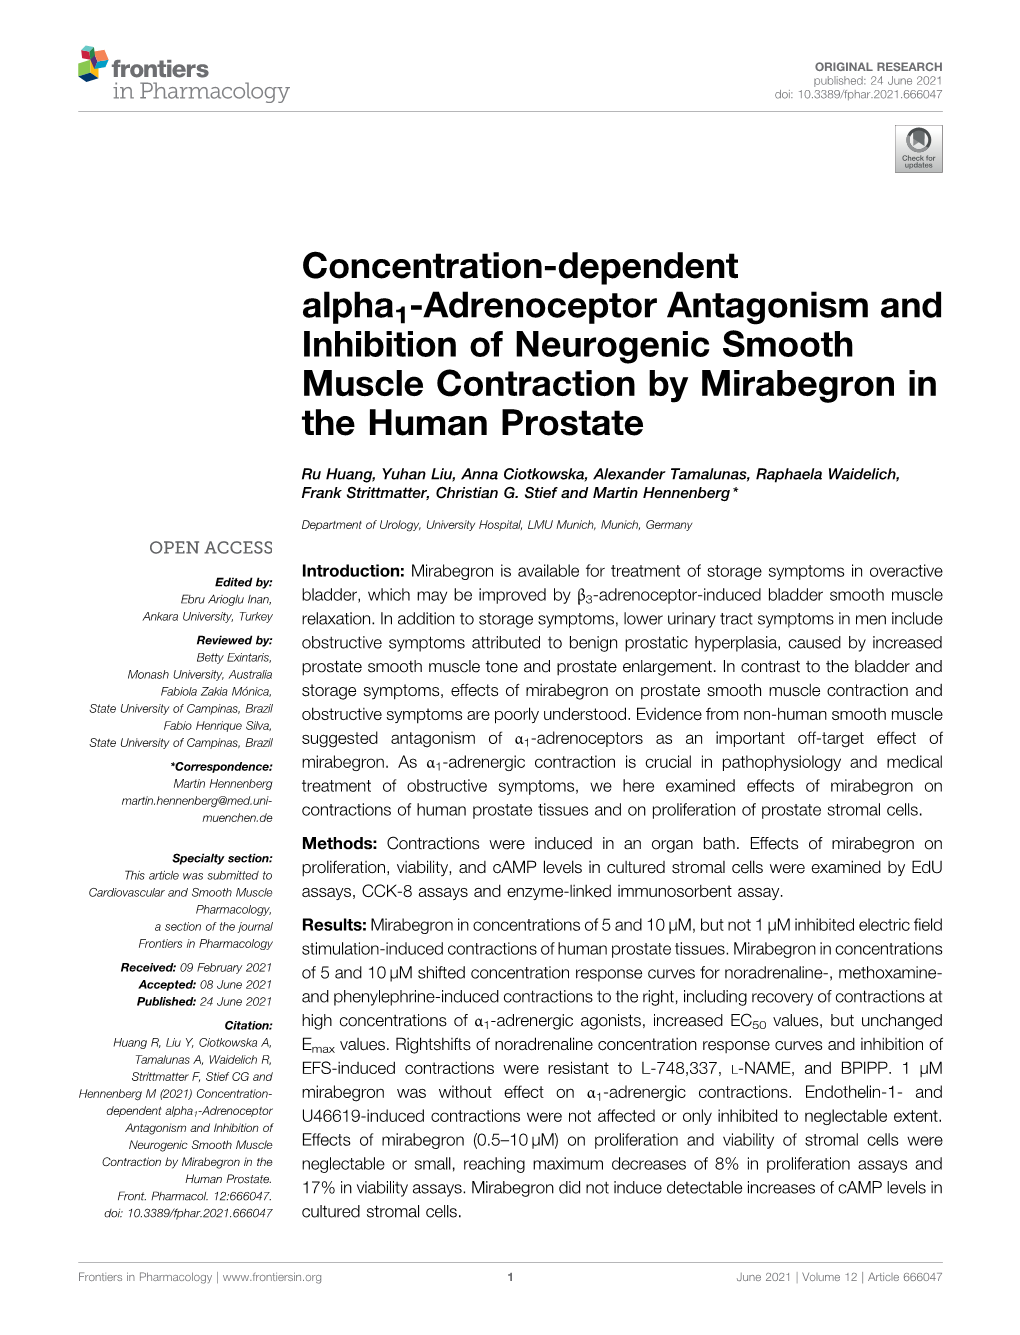 Concentration-Dependent Alpha1-Adrenoceptor Antagonism and Inhibition of Neurogenic Smooth Muscle Contraction by Mirabegron in the Human Prostate